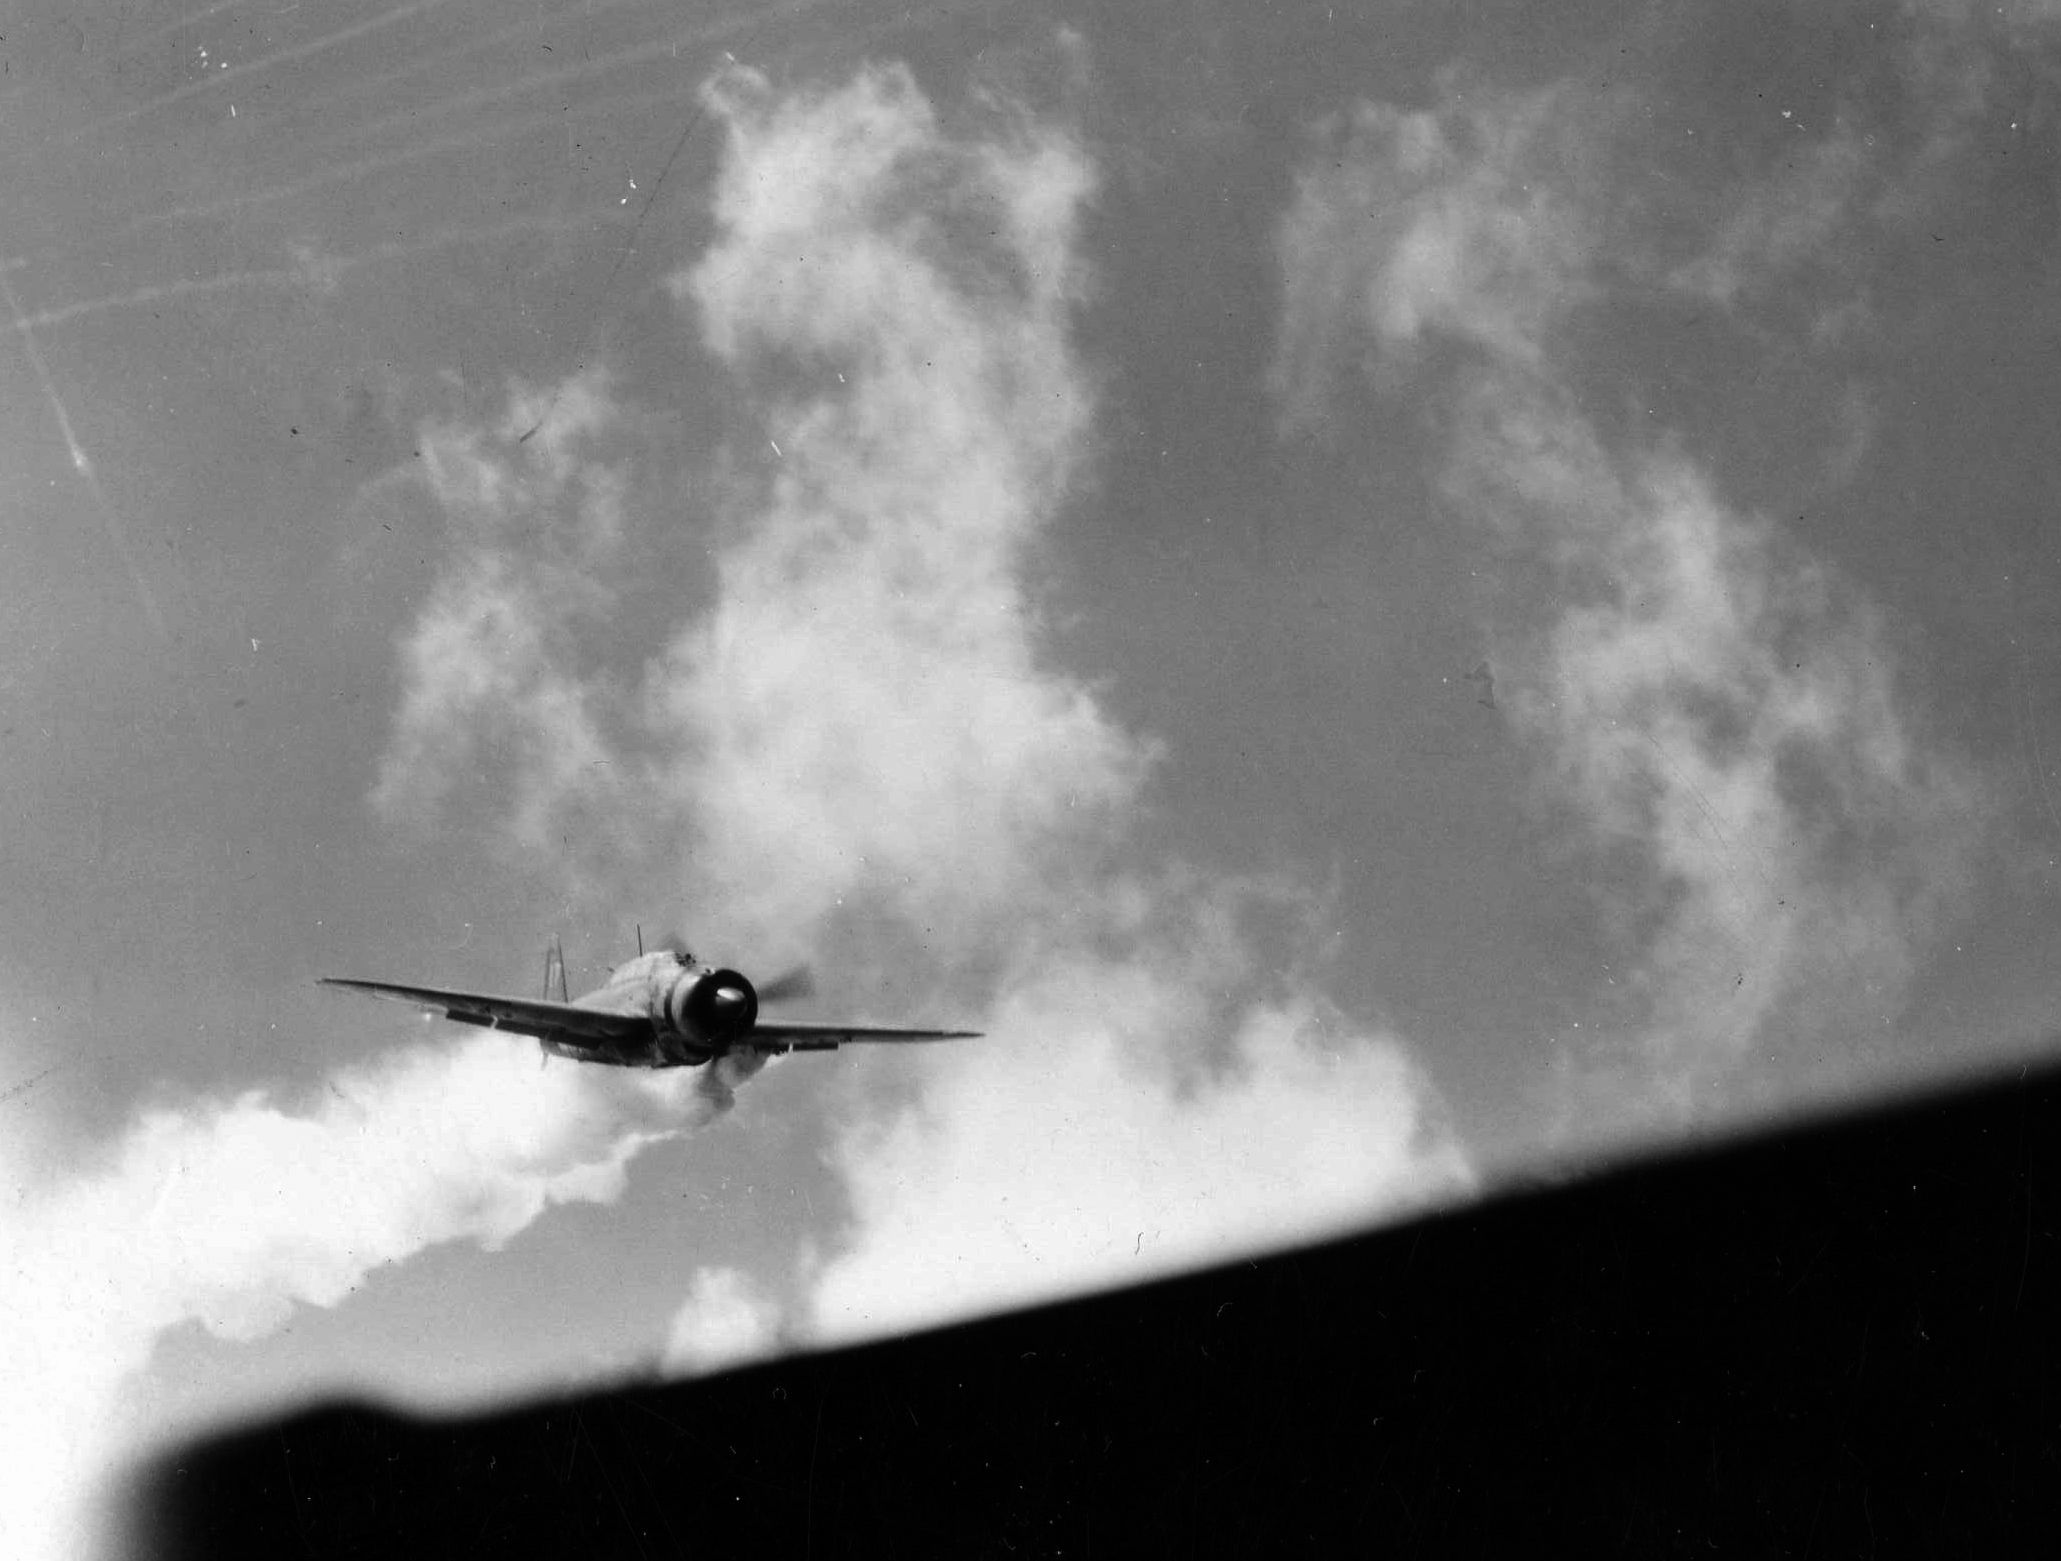 A Japanese dive-bomber, its pilot bent on a suicide crash into the aircraft carrier USS Essex, streams thick smoke during its final plunge. (National Archives)